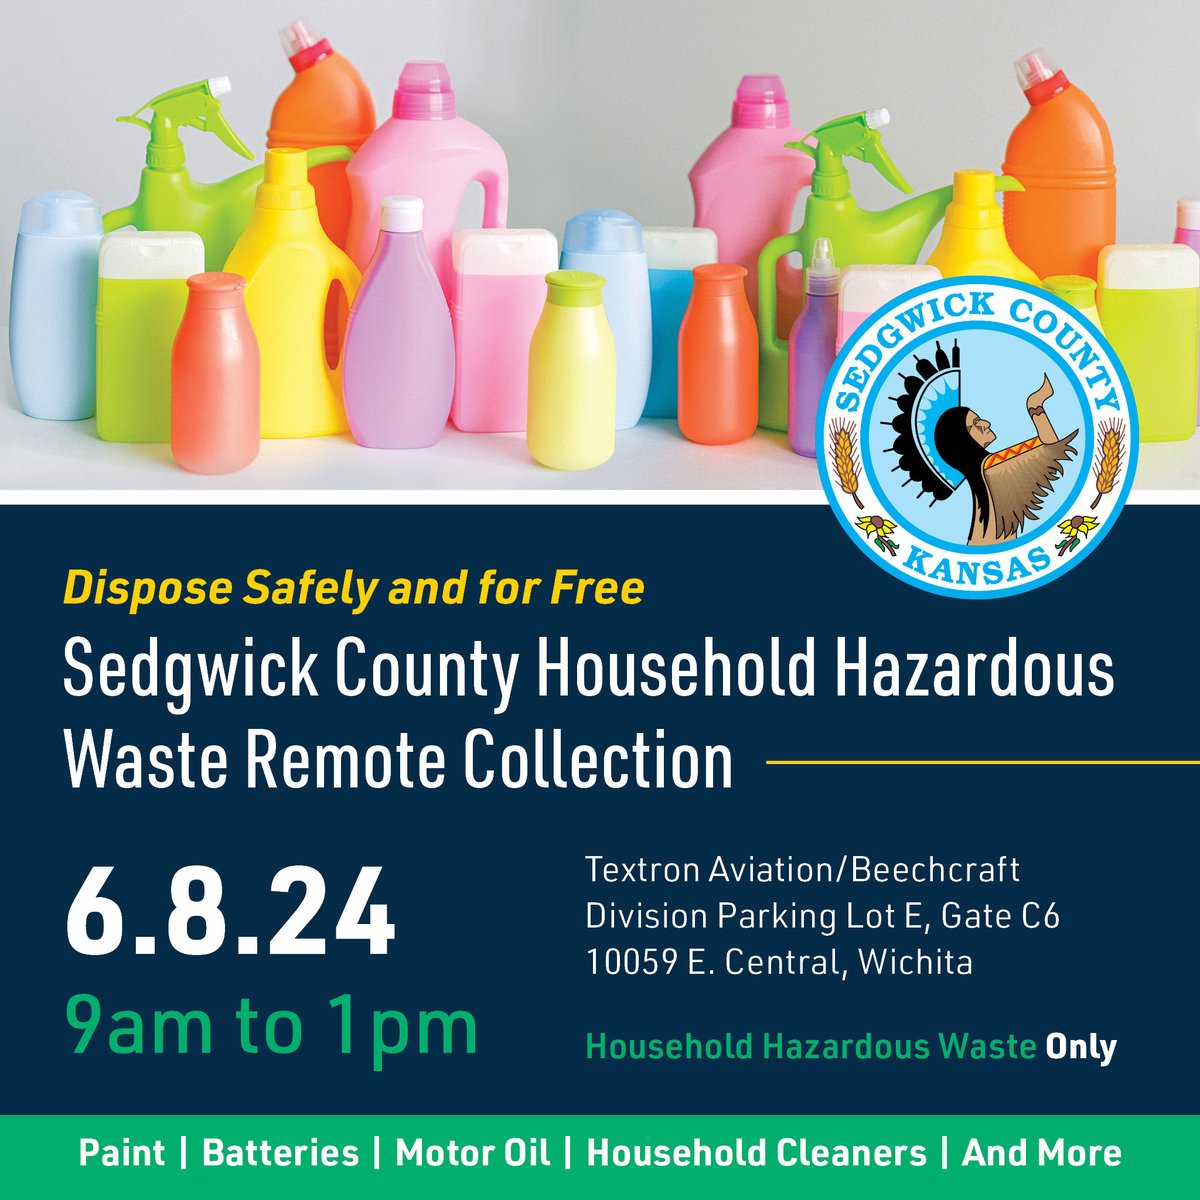 Sedgwick County Household Hazardous Waste Facility will be hosting a Household Hazardous Waste Remote Collection on June 8. Come drop off your used paint, batteries, motor oil, household cleaners and more at 10059 E. Central. For more information: sedgwickcounty.org/environment/ho….